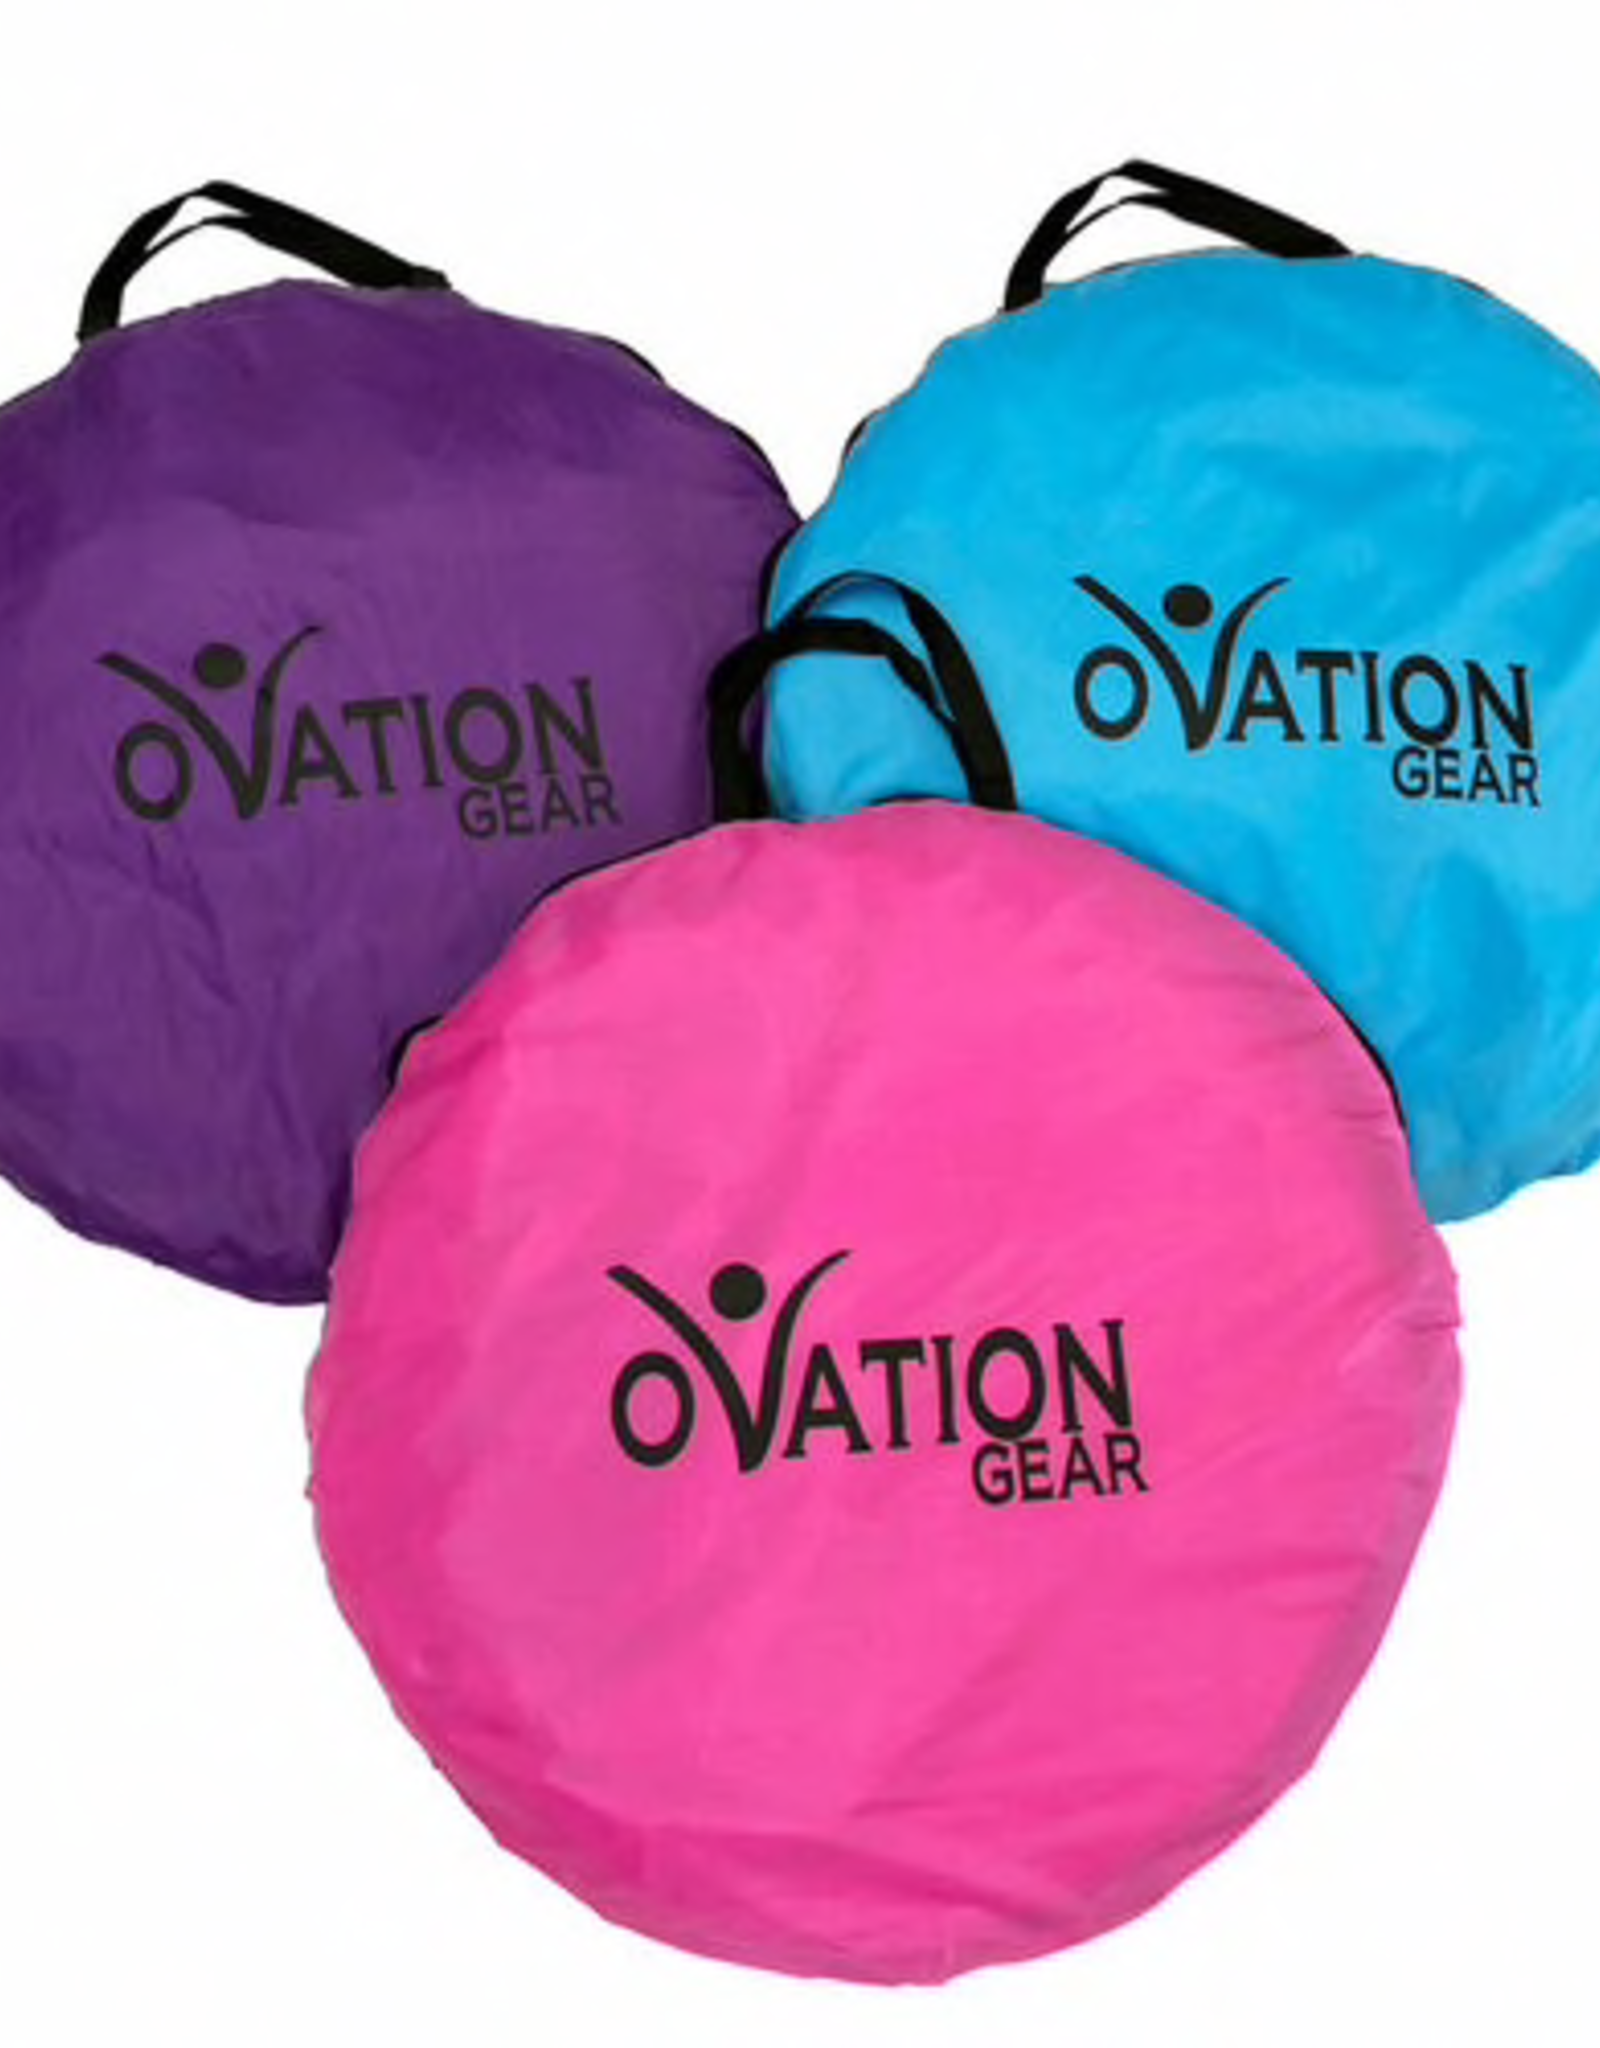 Ovation Gear Pop Up Changing Tent